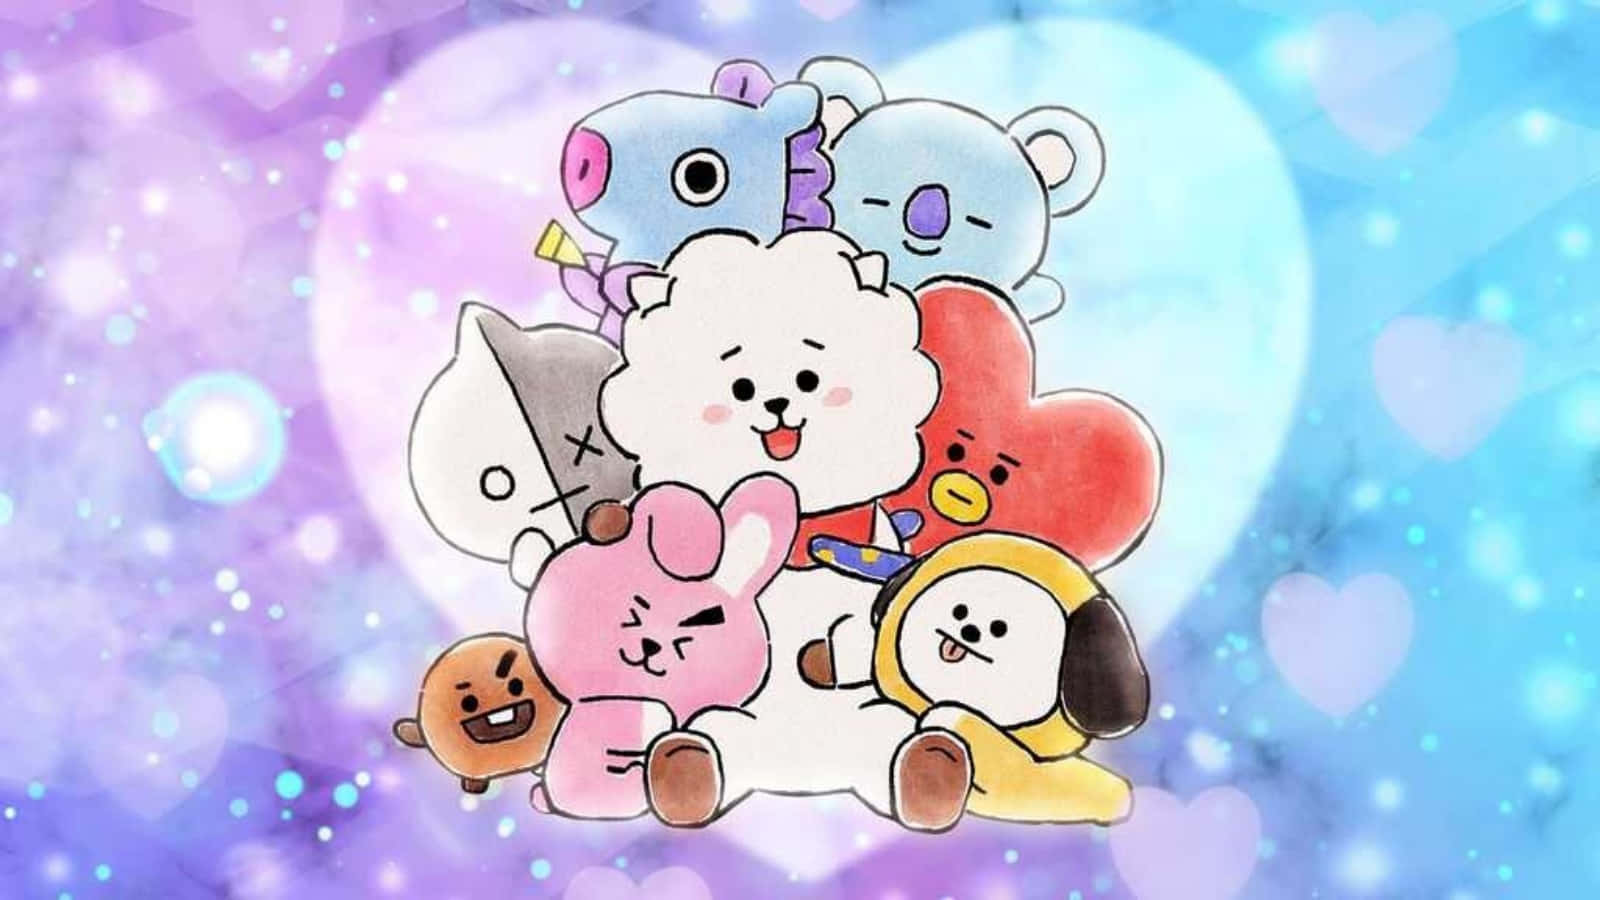 "BTS X BT21 collaboration - Get Ready to Adore the Line of Character-Based Goods"